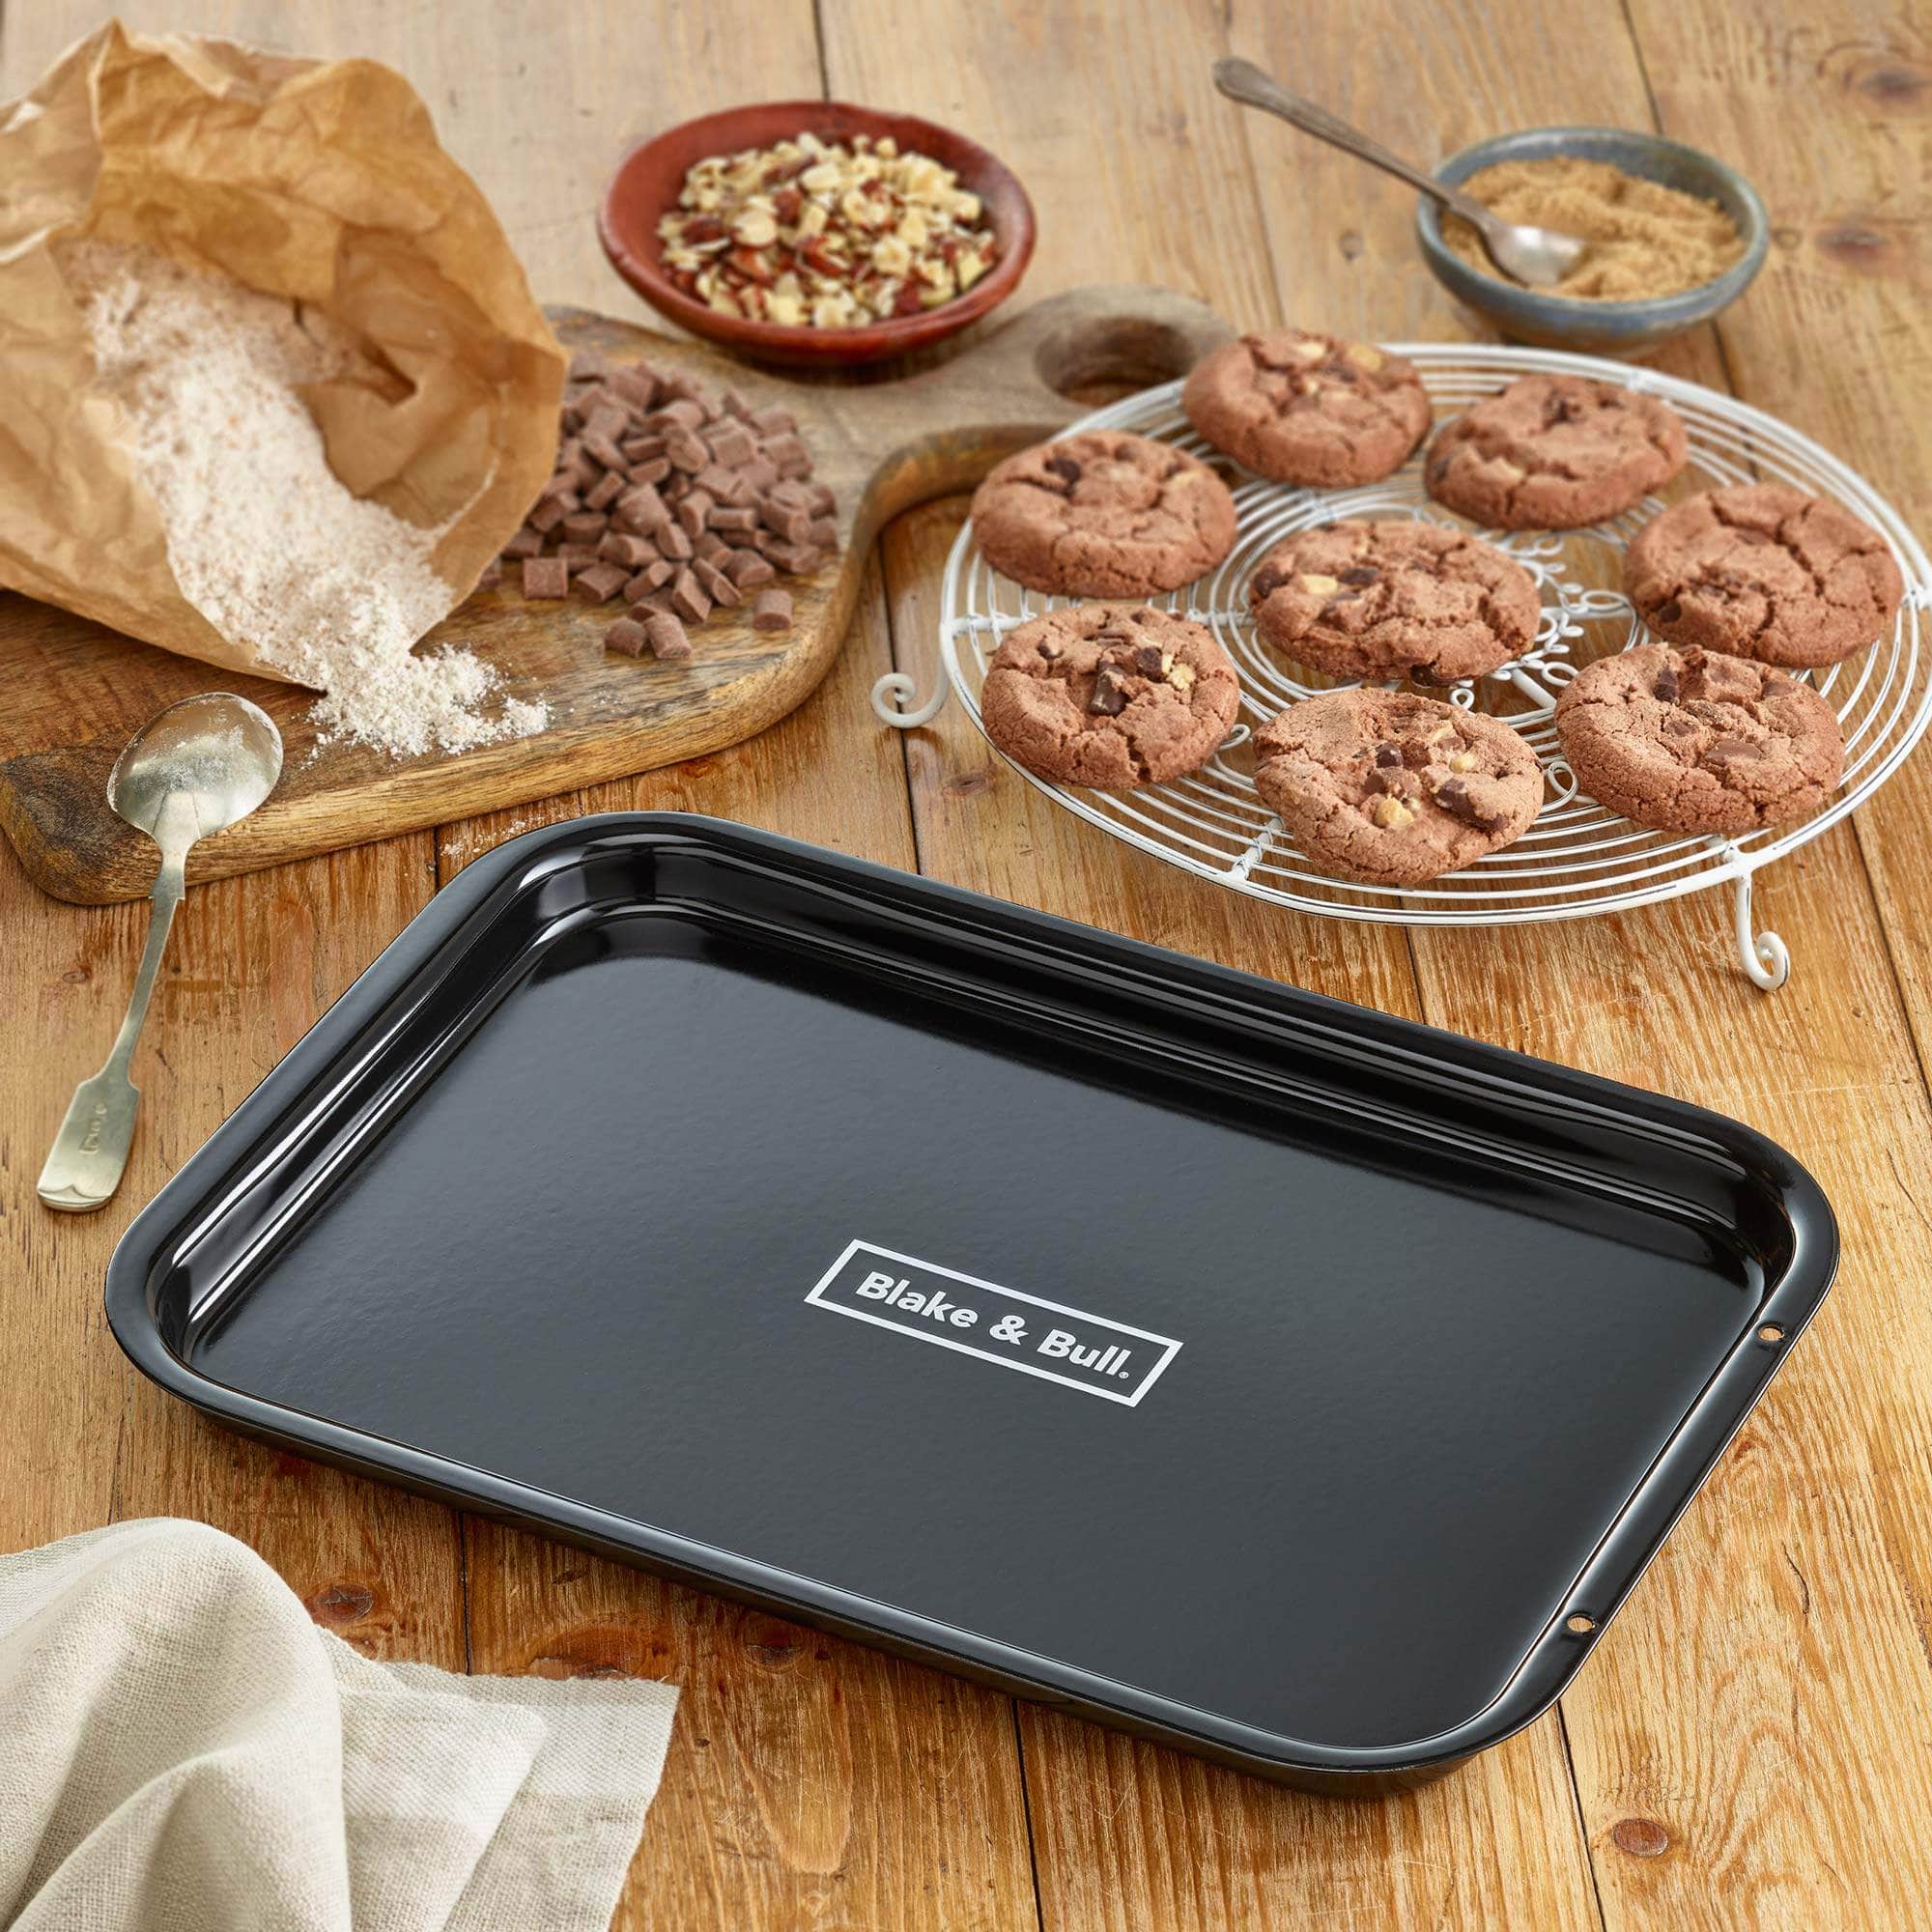 'Fits on runners' black enamelled baking tray for use with Aga range cookers 'half oven' size